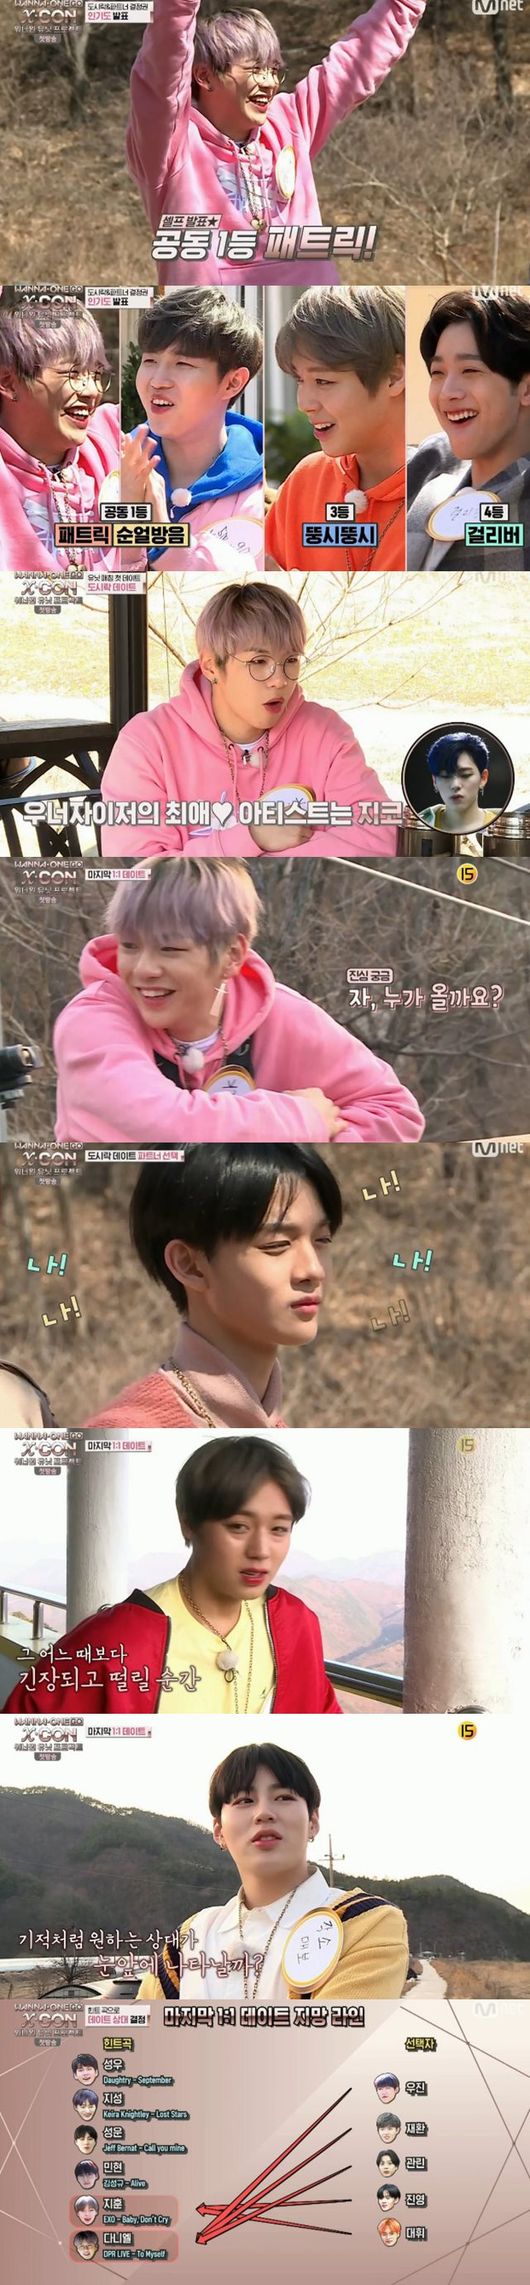 In the first Mnet new entertainment Wanna One Go: X-CON broadcast on the 7th, the members of Wanna One, who perform various missions to make the unit, got on the air during the past year, and the members said, I have been loved so much and have been on various stages. I have experienced it, I was amazed and grateful every moment, and I thank you to the Wannable who made us now. There was a part that was hard to reveal what we wanted to show because there were many members, and I will show you a new look with unit and collaboration. They then went into a mountain meeting to set unit members.Kang Daniel is Patrick, Park Jihoon is fat, Lee Dae-hui is Rihanna, Kim Jae-hwan is a sound-breaking sound, Ong Sung-woo is a tactile tactile, Park Woo-jin is a non-Zeer, Rygwan is a gulliver, Tal, Bae Jin Young made his nickname as Sodu and Ha Sung-woon as small-sleeve, and the members appealed to each other with their own introduction including personal period.Following the two men who came in first place, Park Jihoon took third place, Rygwanlin took fourth place, Kang Daniel took Park Woo-jin, Kim Jae-hwan took Lee Dae-hwi, Park Jihoon took Bae Jin Young, and Rygwanrin took Hwang Min-hyun Choices.Ong Sung-woo, Yoon Ji-sung, and Ha Sung-woon, who were not Choices to them, comforted each other by eating herb lunch boxes and ramen. Then a couple cheerful athletic meet was held, Yoon Ji-sung and Li Kwanlin Joe won first place, Kang Daniel and Park Jihoon group won second place.In particular, the first team got a chance to look into the partners heart of the member they wanted, and all of them were troubled and laughed when they did not have their own face in the necklace. After that, Kang Daniel, Park Jihoon, Hwang Min Hyun, Ha Sung Woon, Yoon Ji-sung and Ong Sung Woo left the theme song first and left. The event was held.Above all, Park Woo-jin, Kim Jae-hwan, and Rygwanlin made Kang Daniel, Bae Jin Young, and Lee Dae-hwi Choices Park Jihoon, and the broadcast was finished.